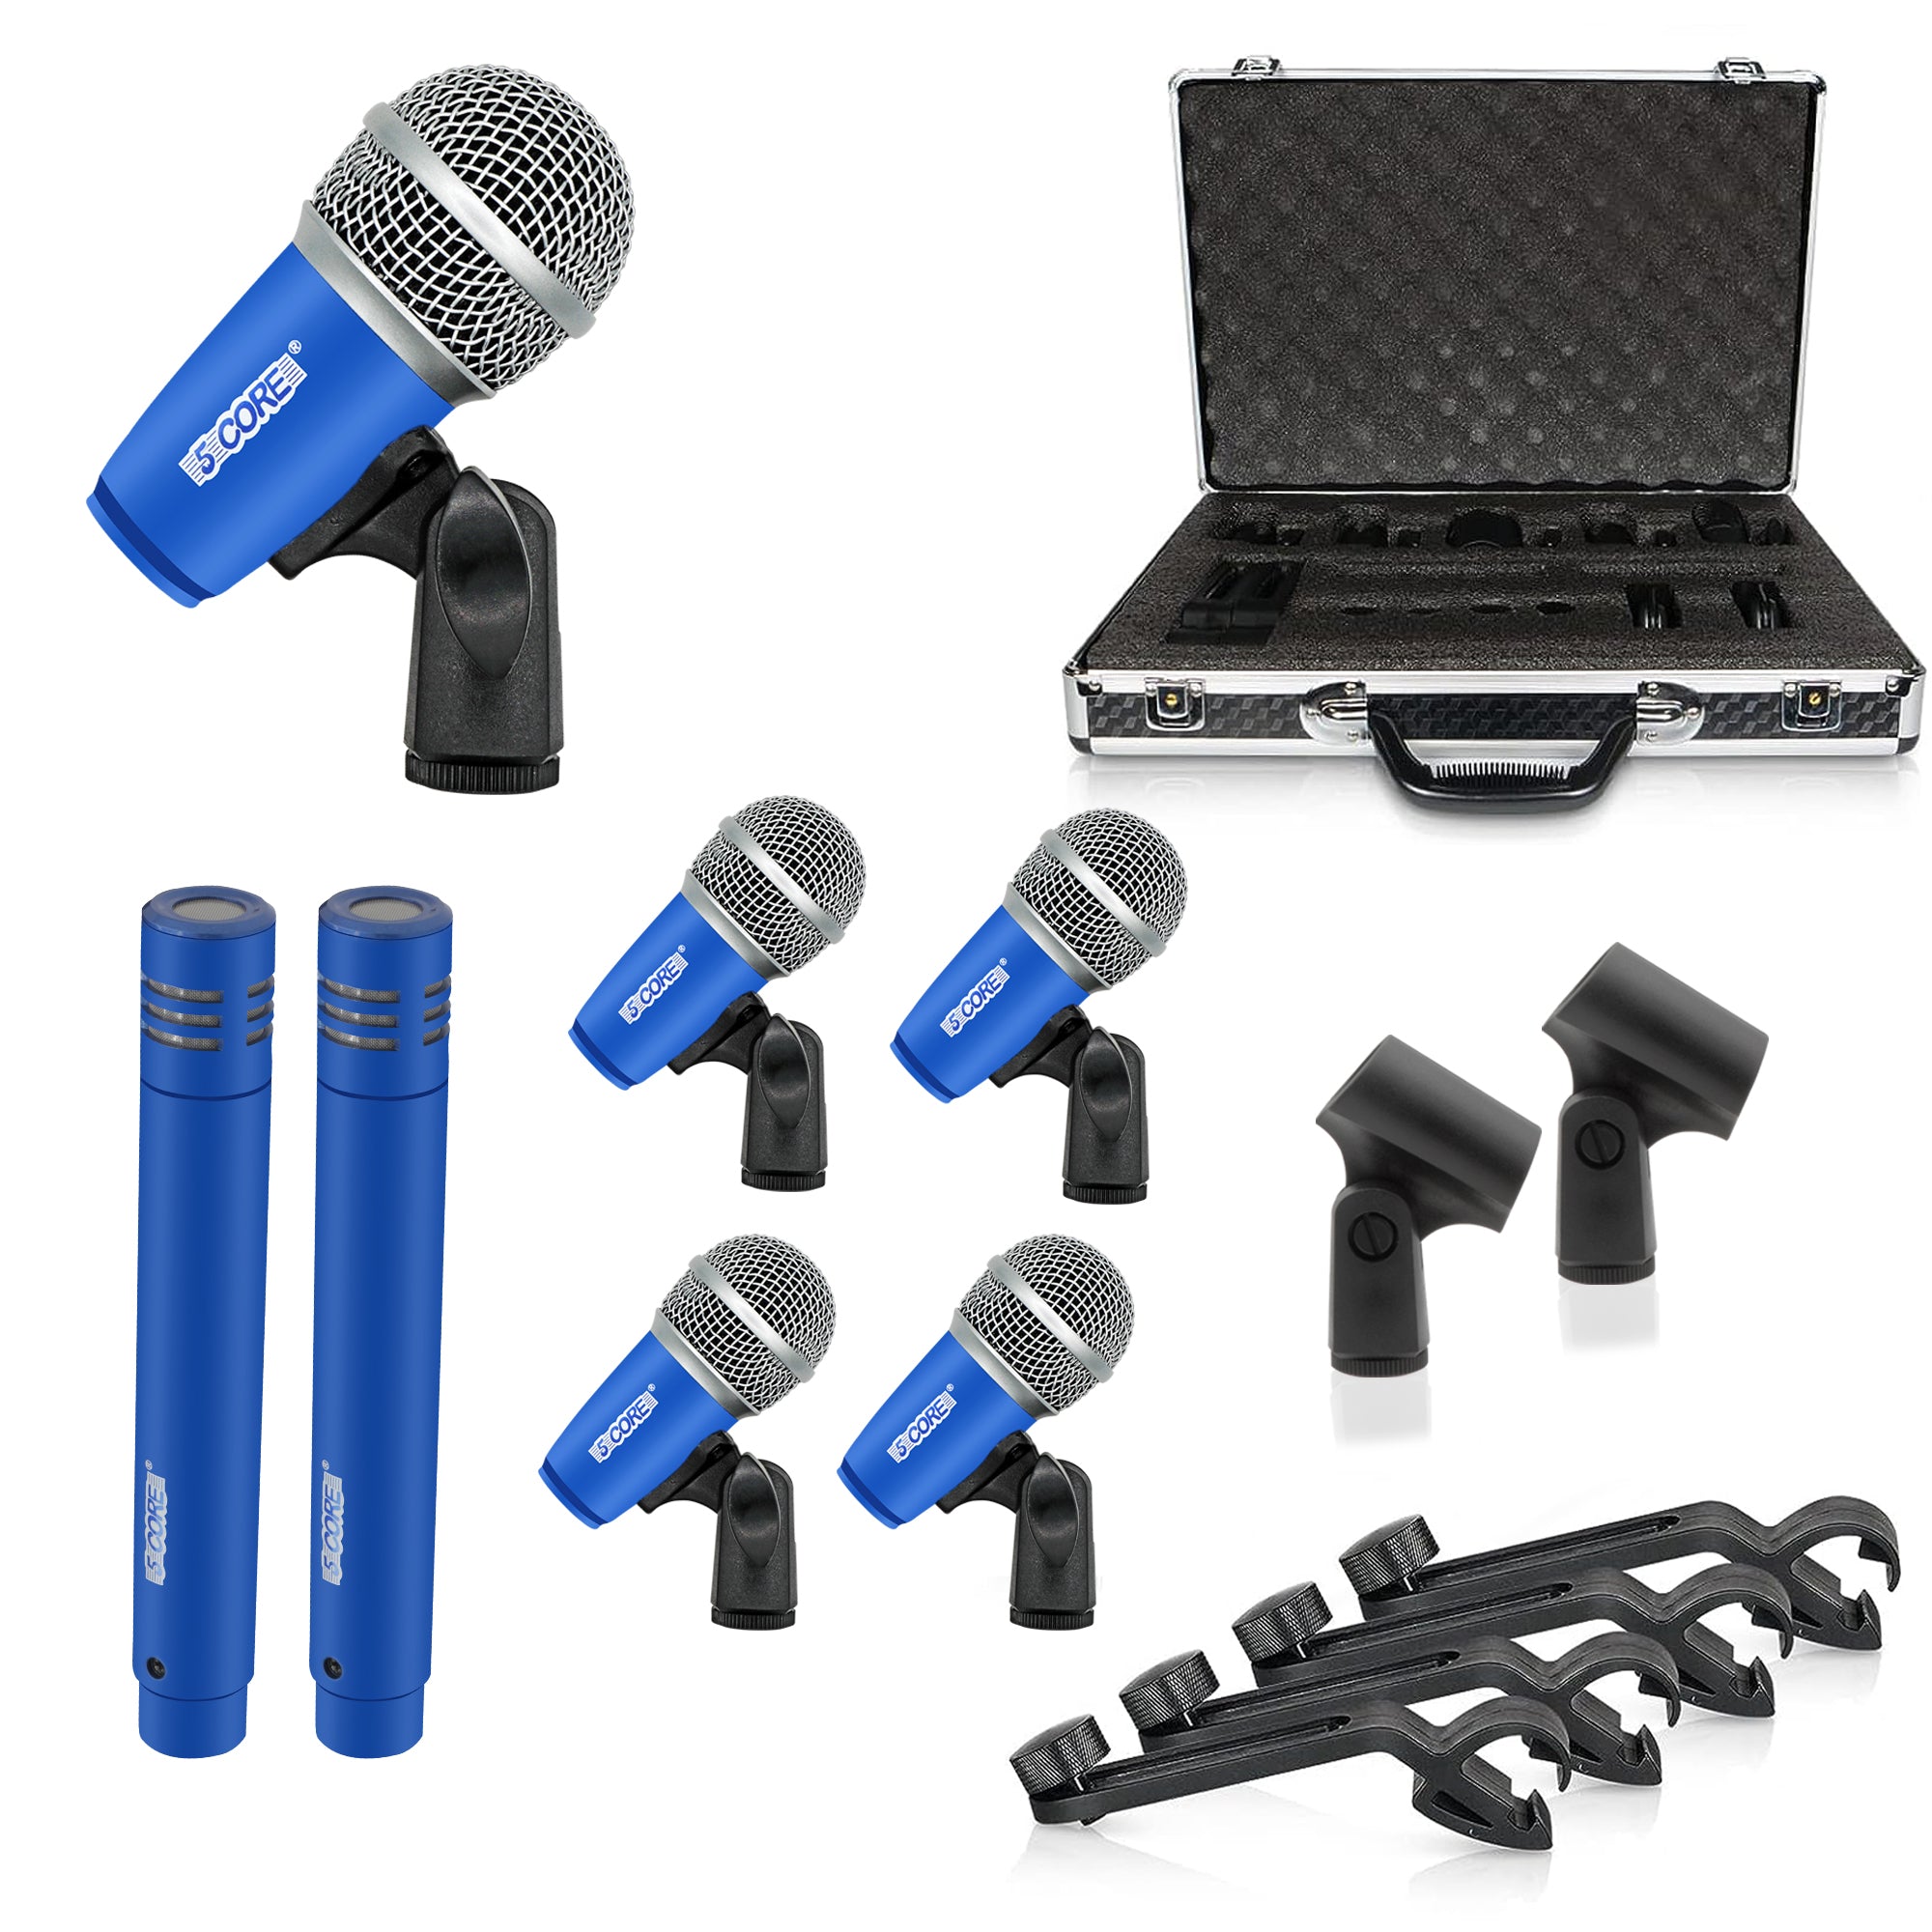 5 Core Drum Microphone Kit 7 Piece Wired Full Metal Dynamic Wired drums Mic Set for Drummers w/ Kick Bass Tom Snare + Silver Carrying Case Sponge & Thread Holder for Vocal & Instrument - DM 7RND BLU